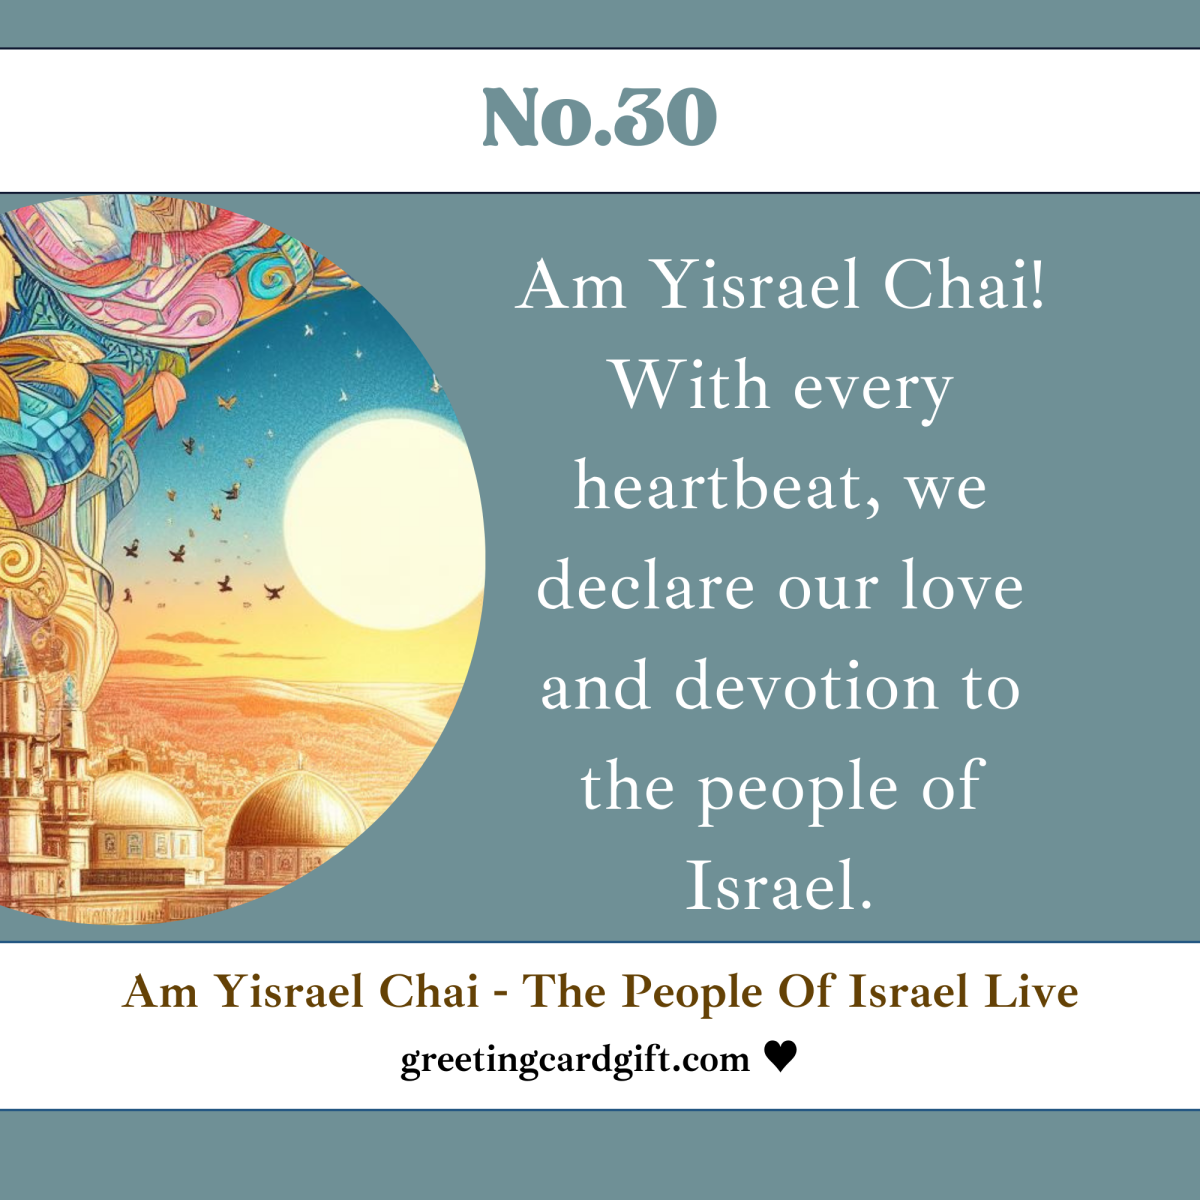 Am Yisrael Chai – The People Of Israel Live – No.30